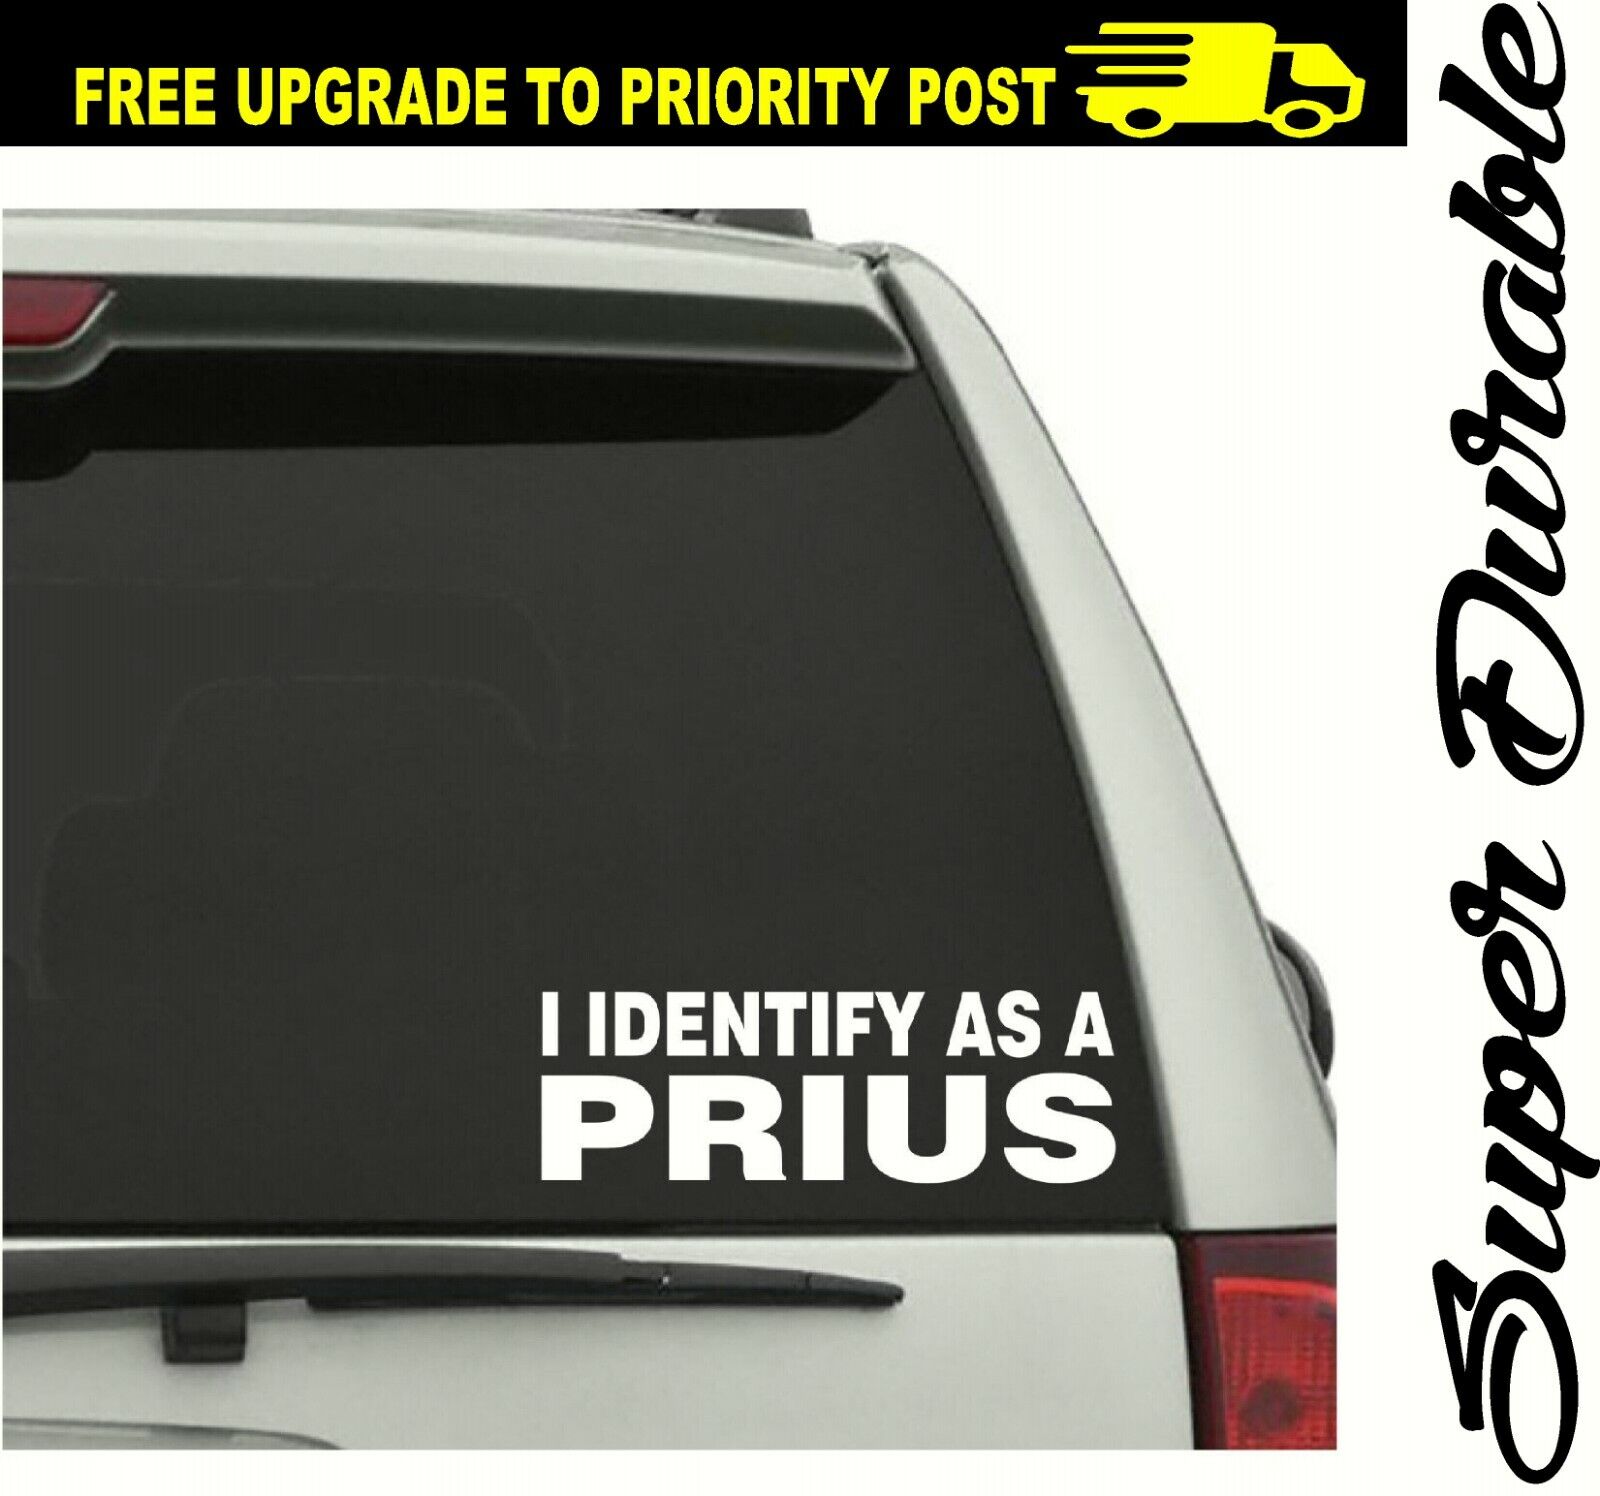 I IDENTIFY AS A PRIUS STICKER 4x4 JDM STANCE DRIFT LIFE LOWERED FUNNY DECAL  | eBay